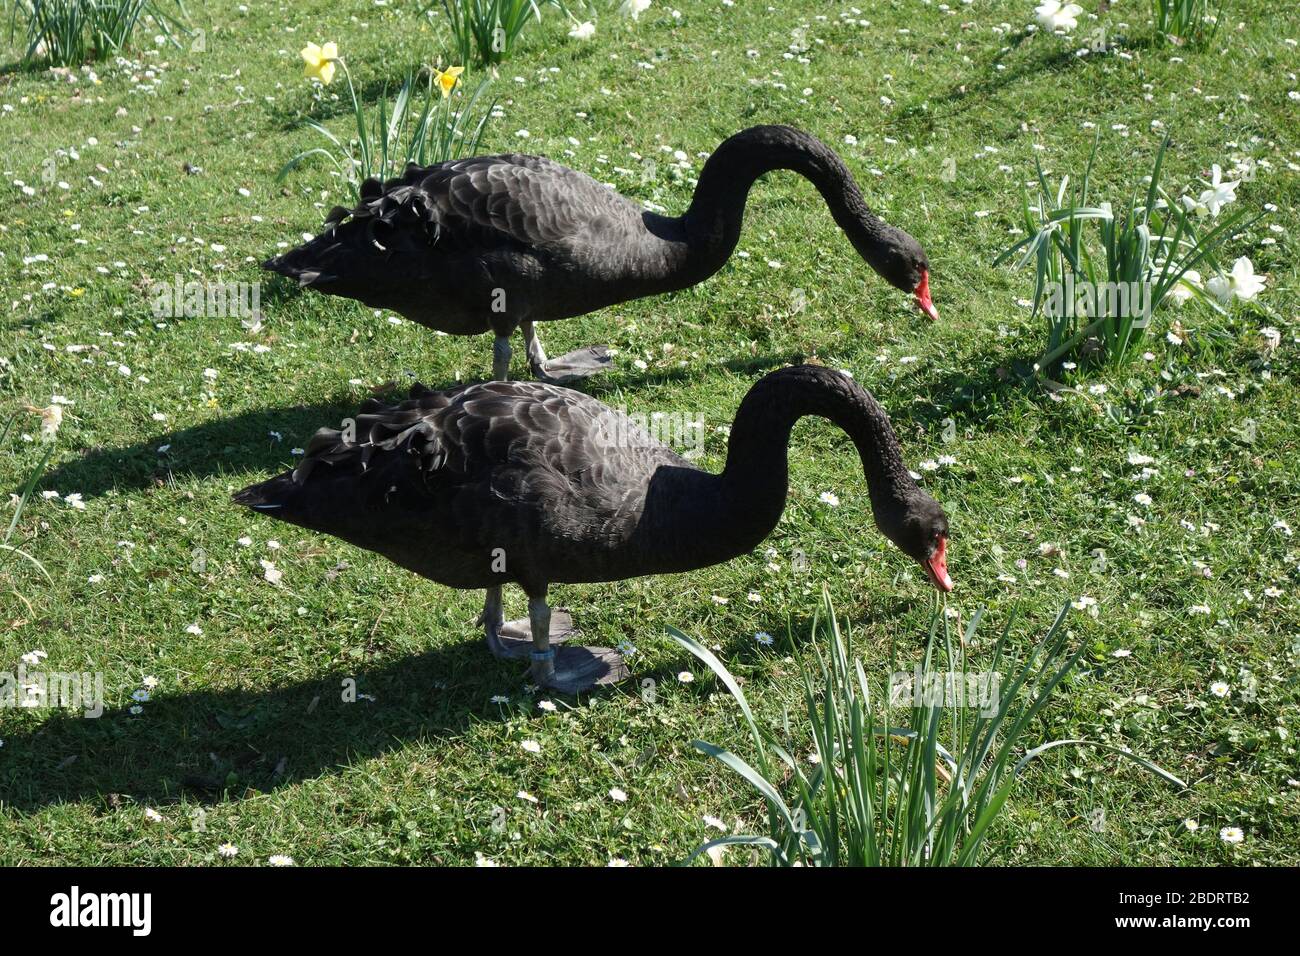 Gahlen, Deutschland. 09th Apr, 2020. Black Swan the Meadow, the Black Swan, Latin Swan, Cygnus Atratus, in the exchange trading, the Black Swan is used after the definition by Nassim